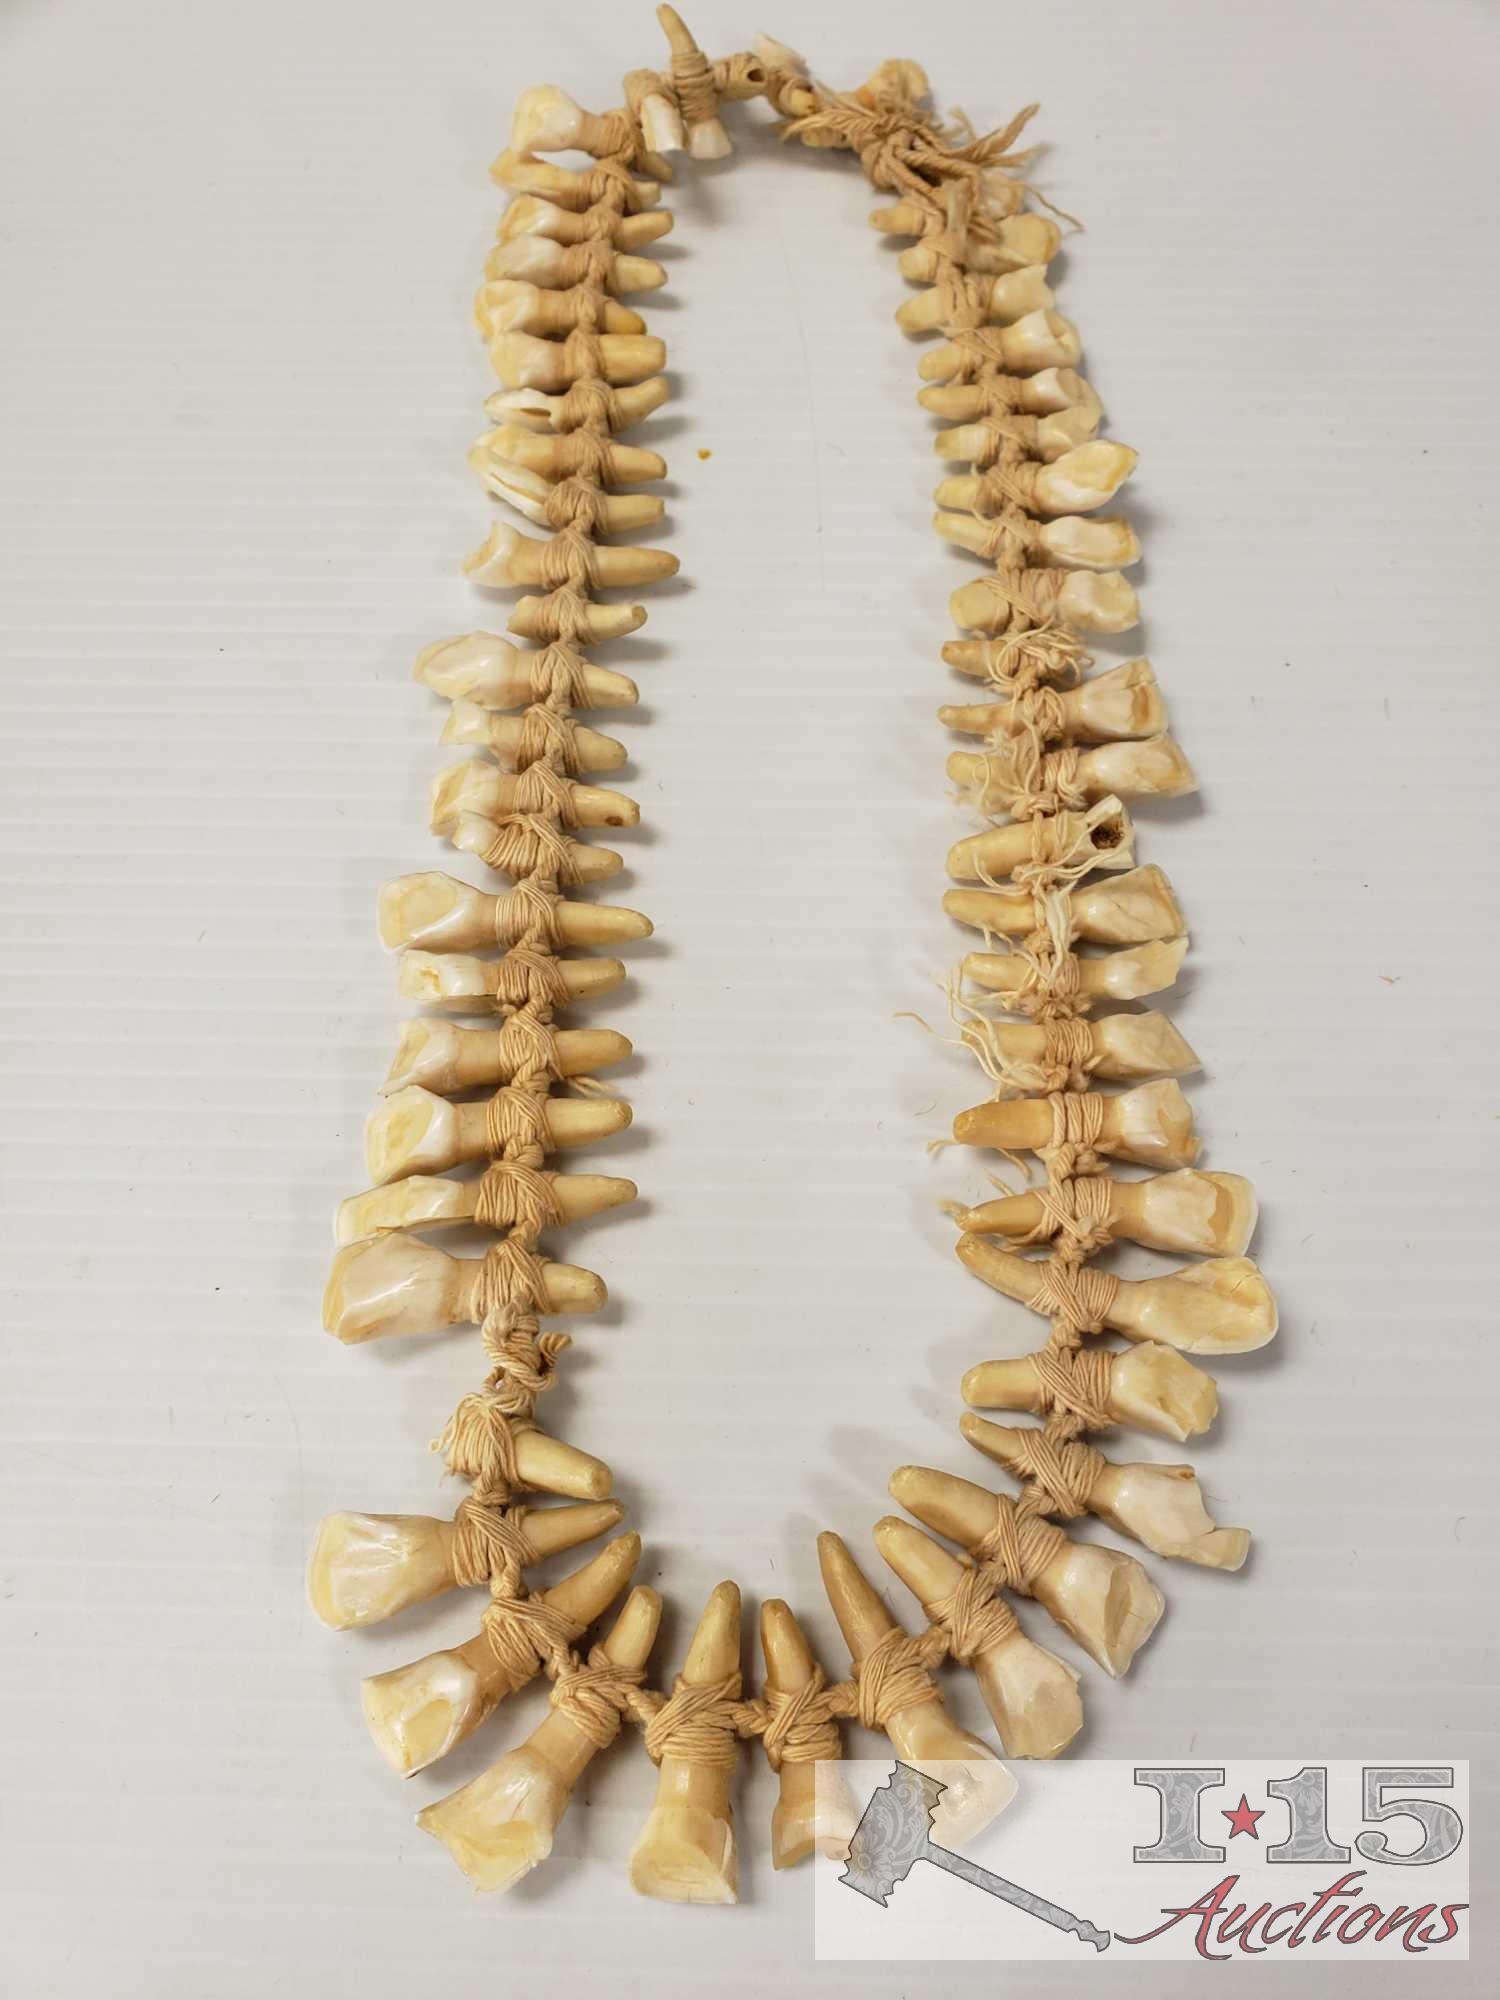 Necklace of Teeth